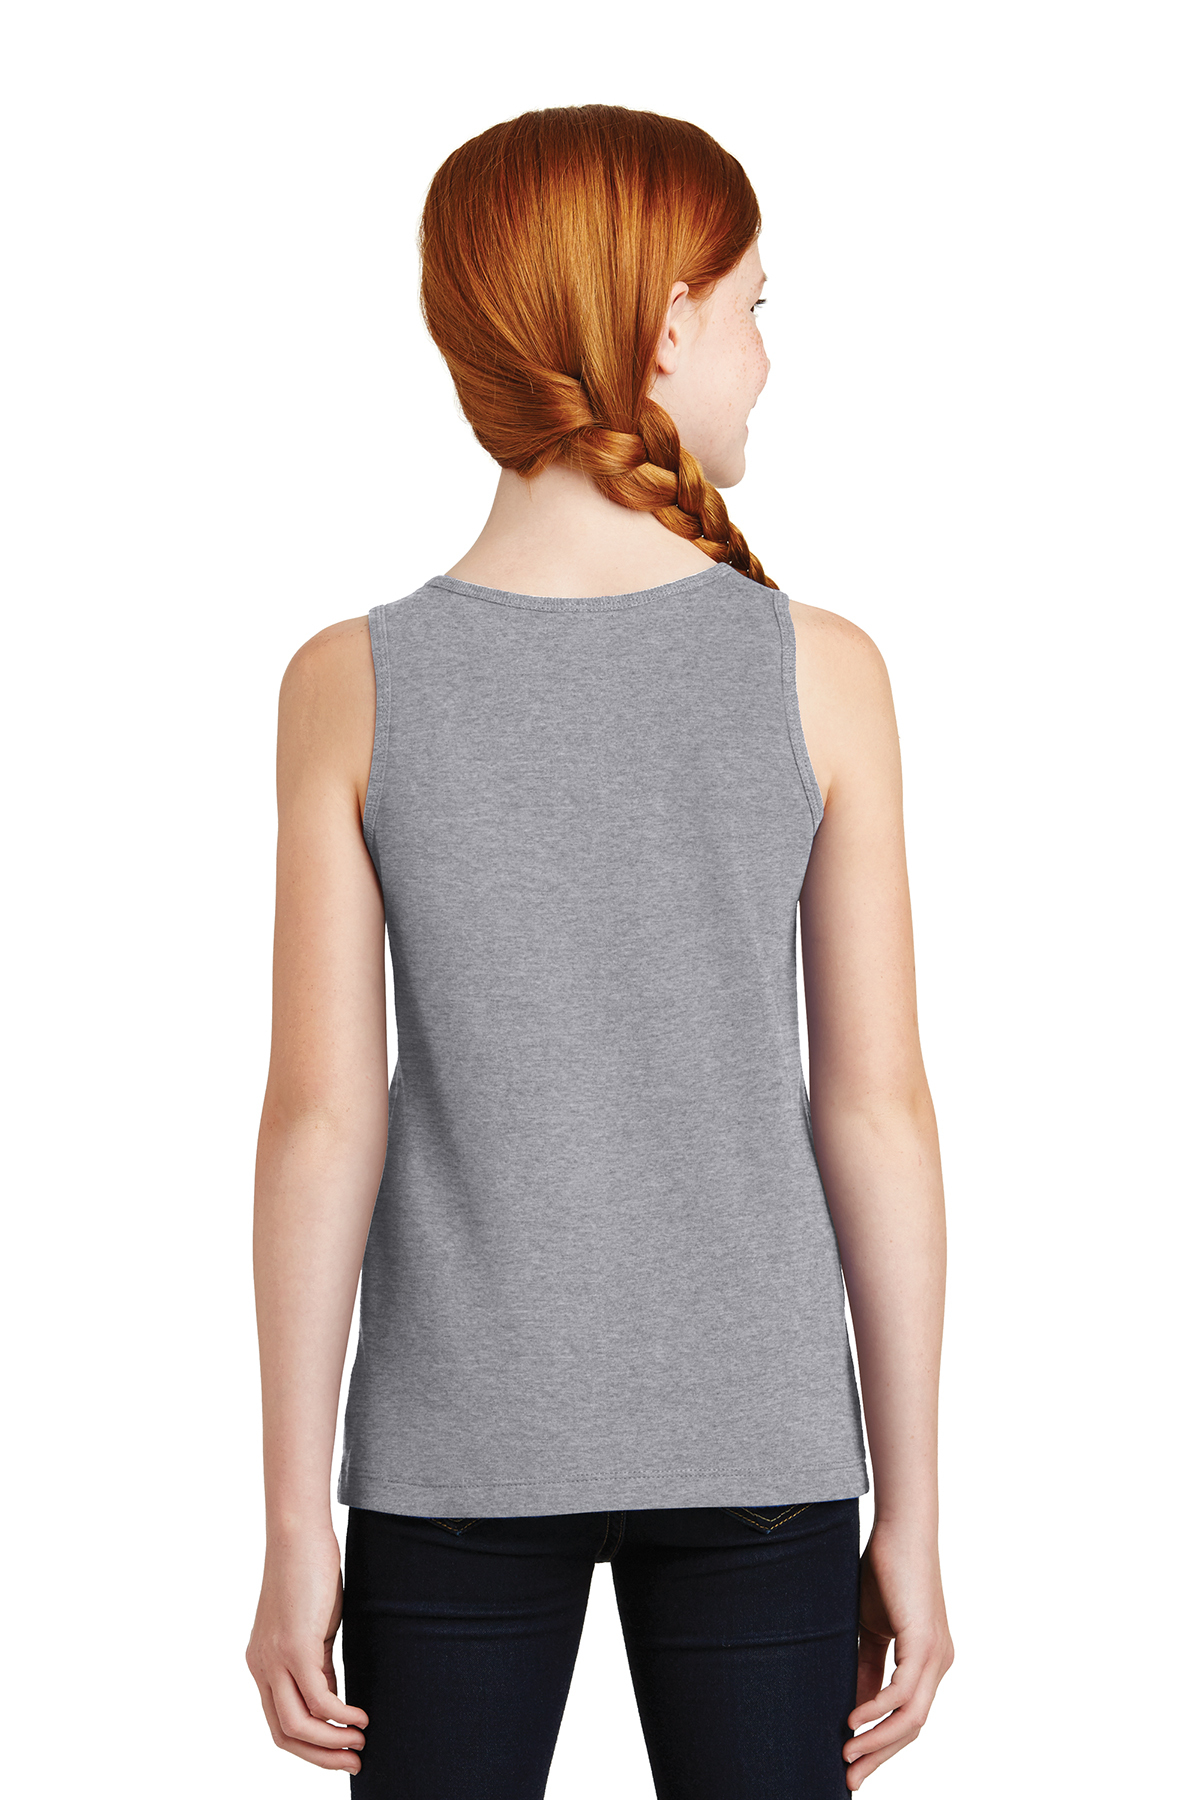 District ® Girls The Concert Tank ™ | Product | SanMar